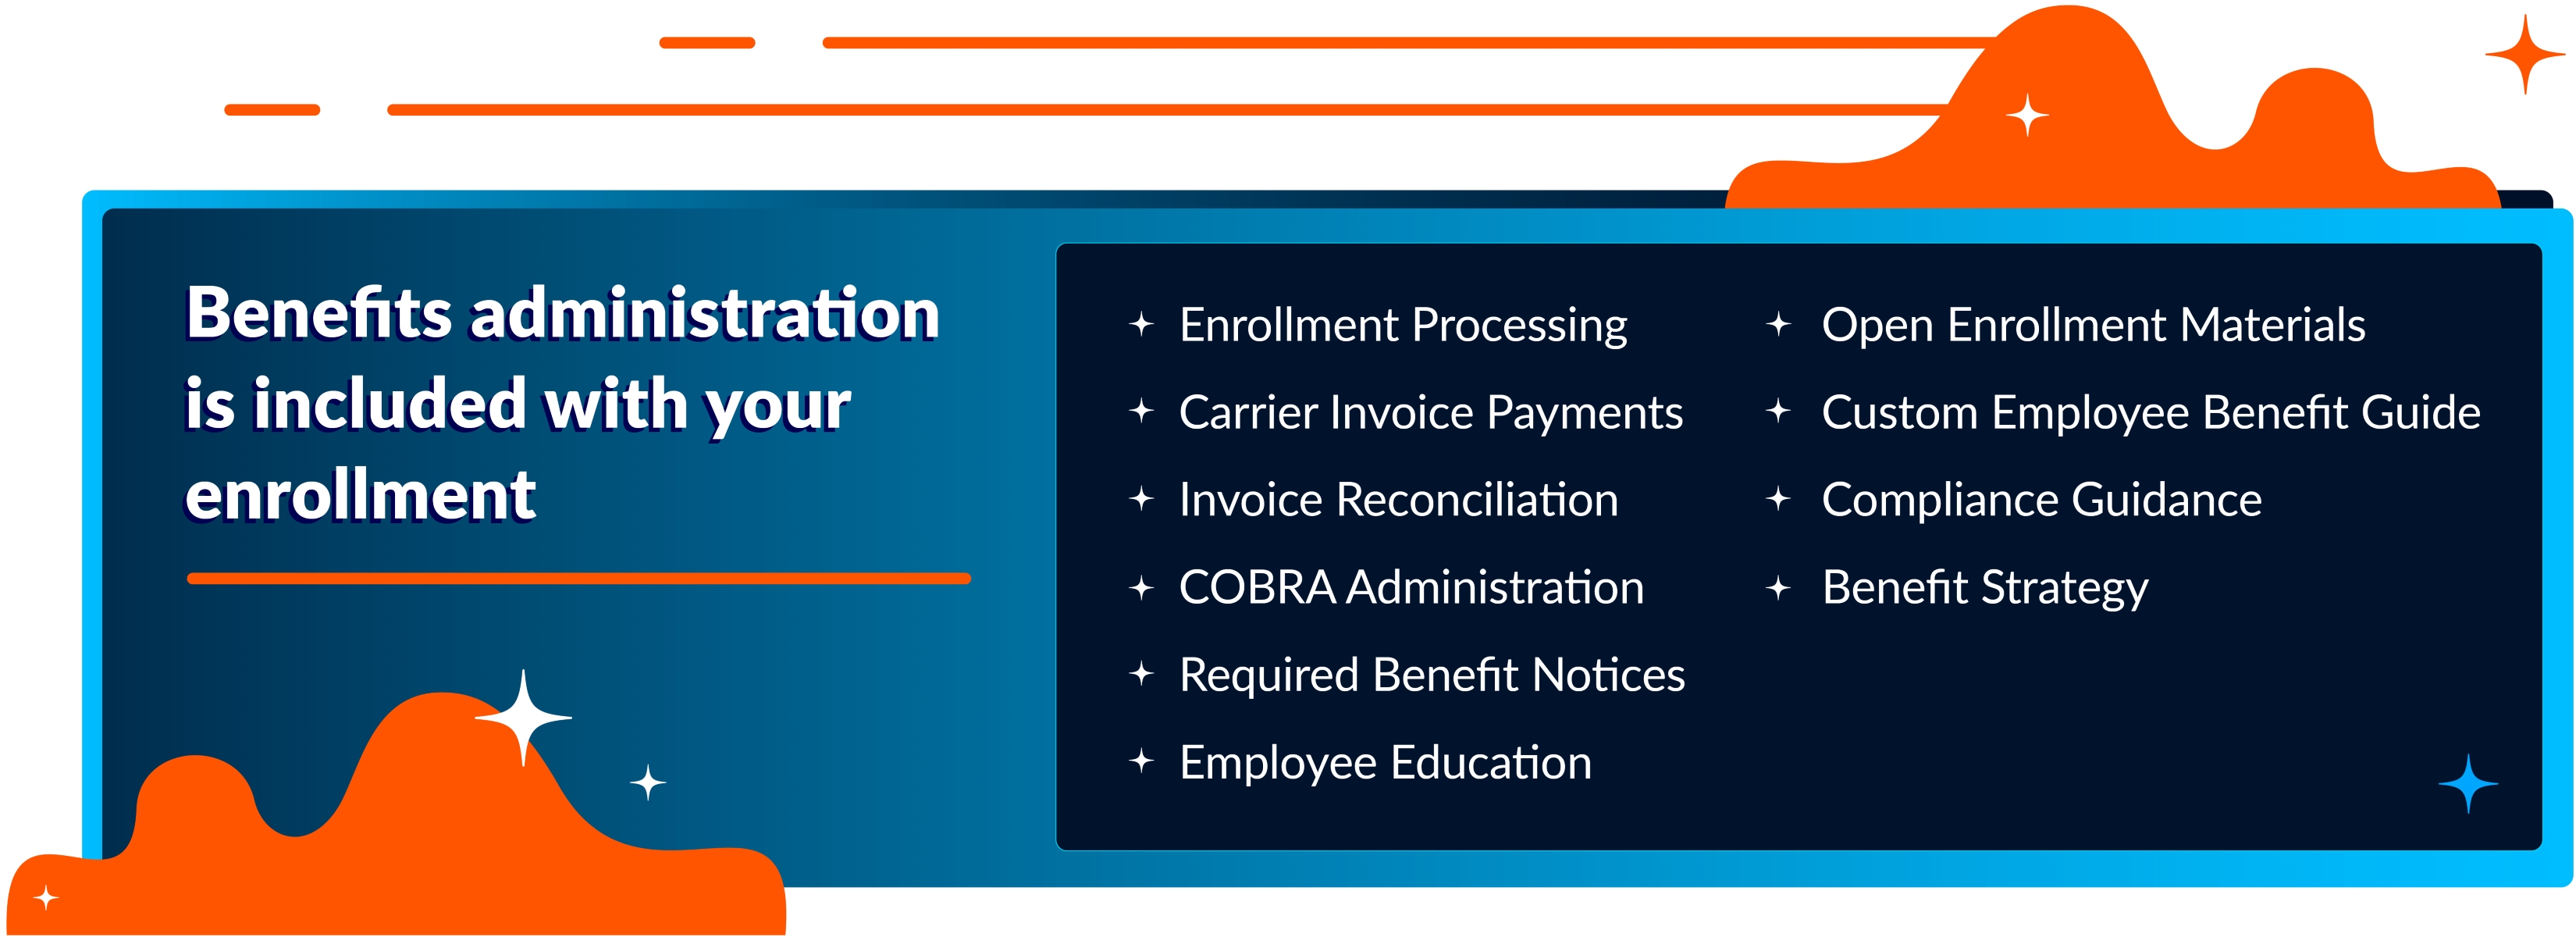 enrollment processing carrier invoice payments invoice reconciliation COBRA administration Required benefit notices employee education open enrollment materials custom employee benefit guide compliance guidance benefit strategy